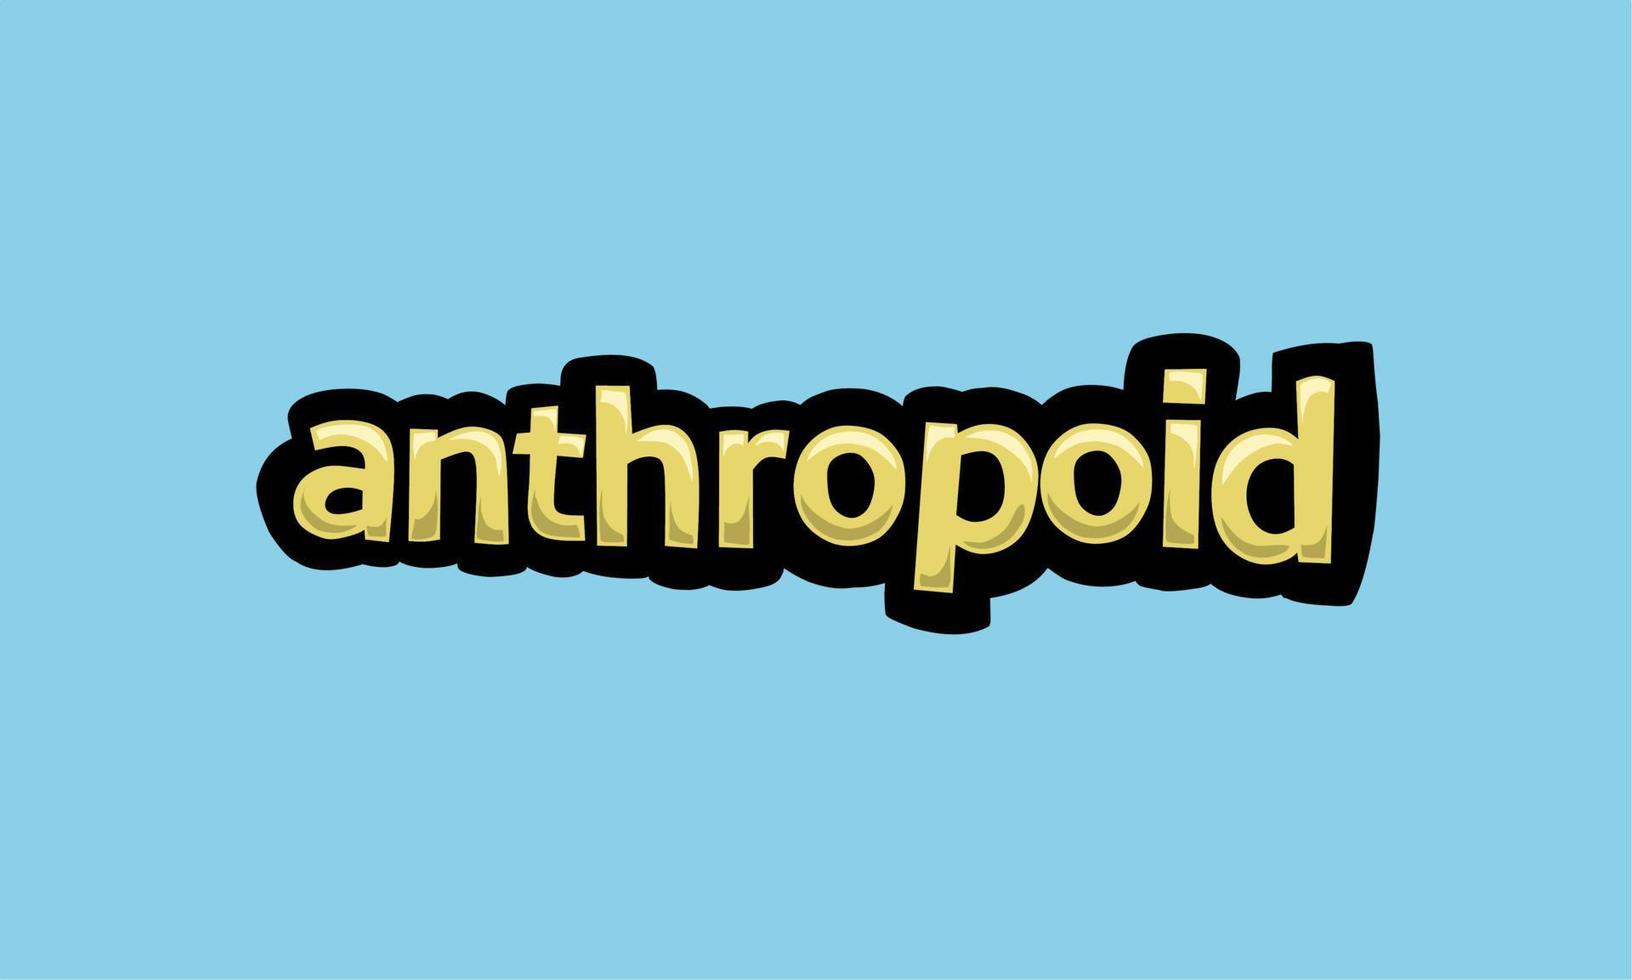 ANTHROPOID writing vector design on a blue background